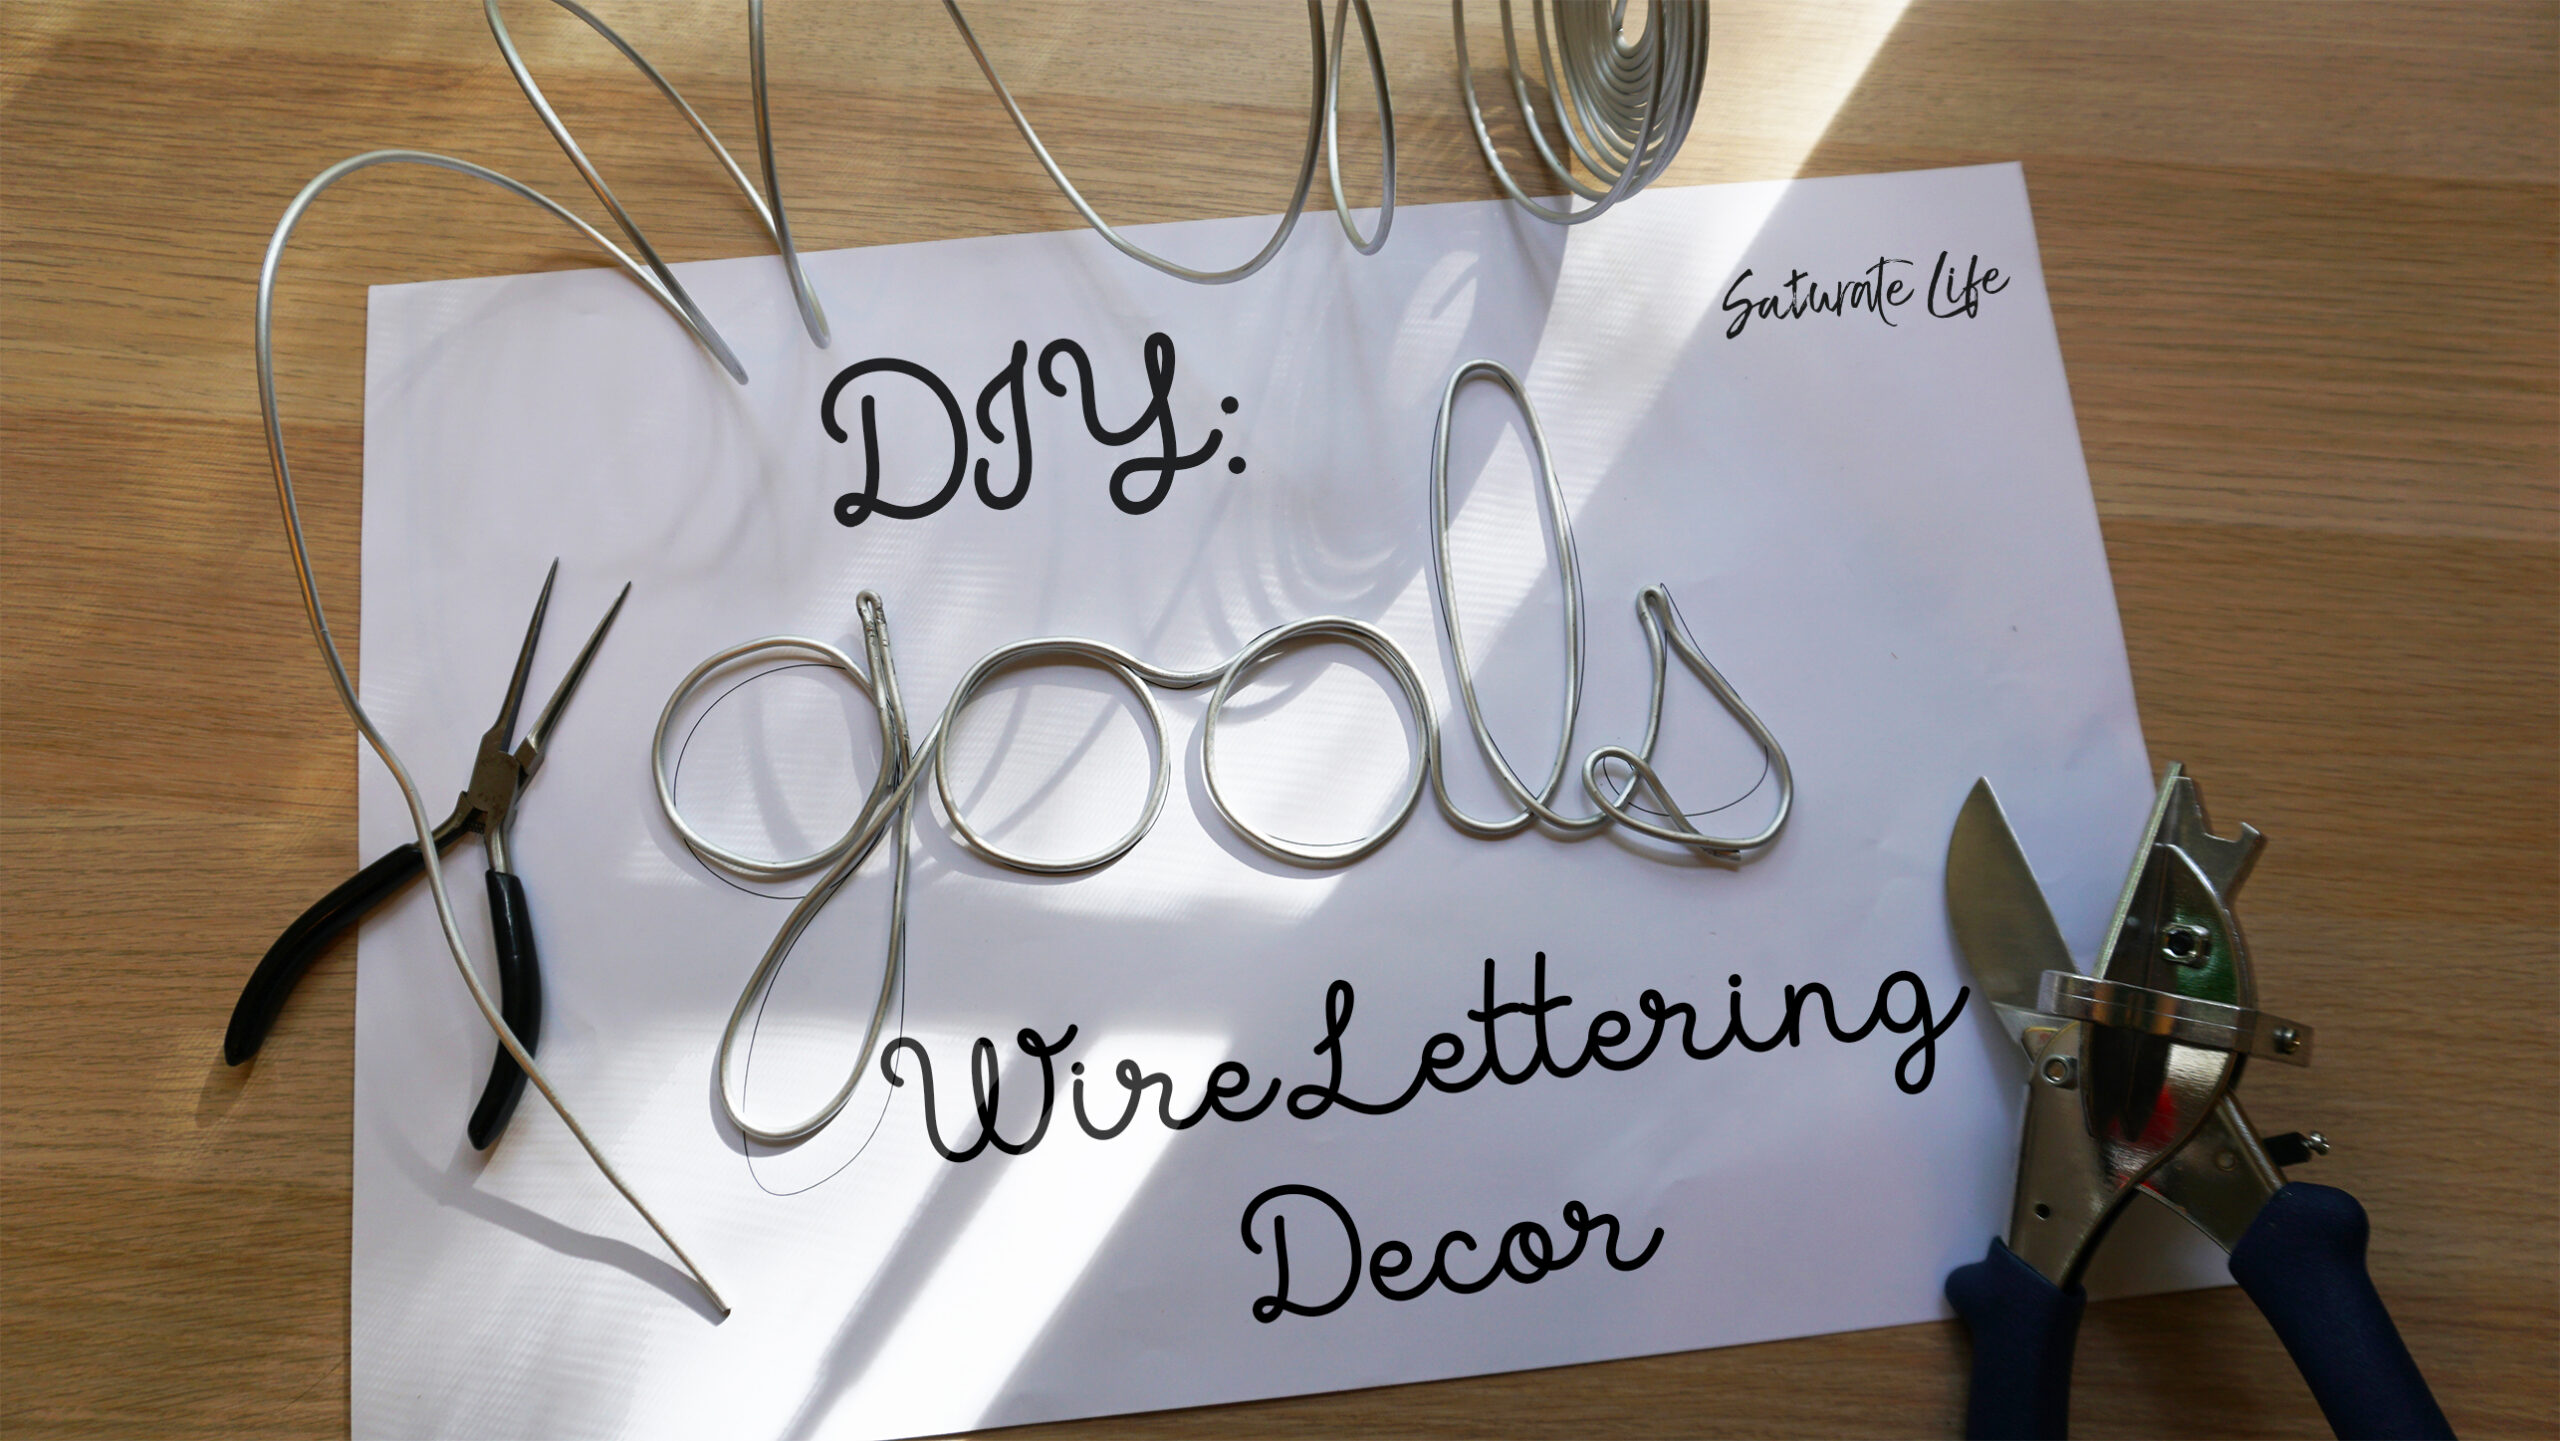 DIY Wire Lettering Decor - Saturate Life